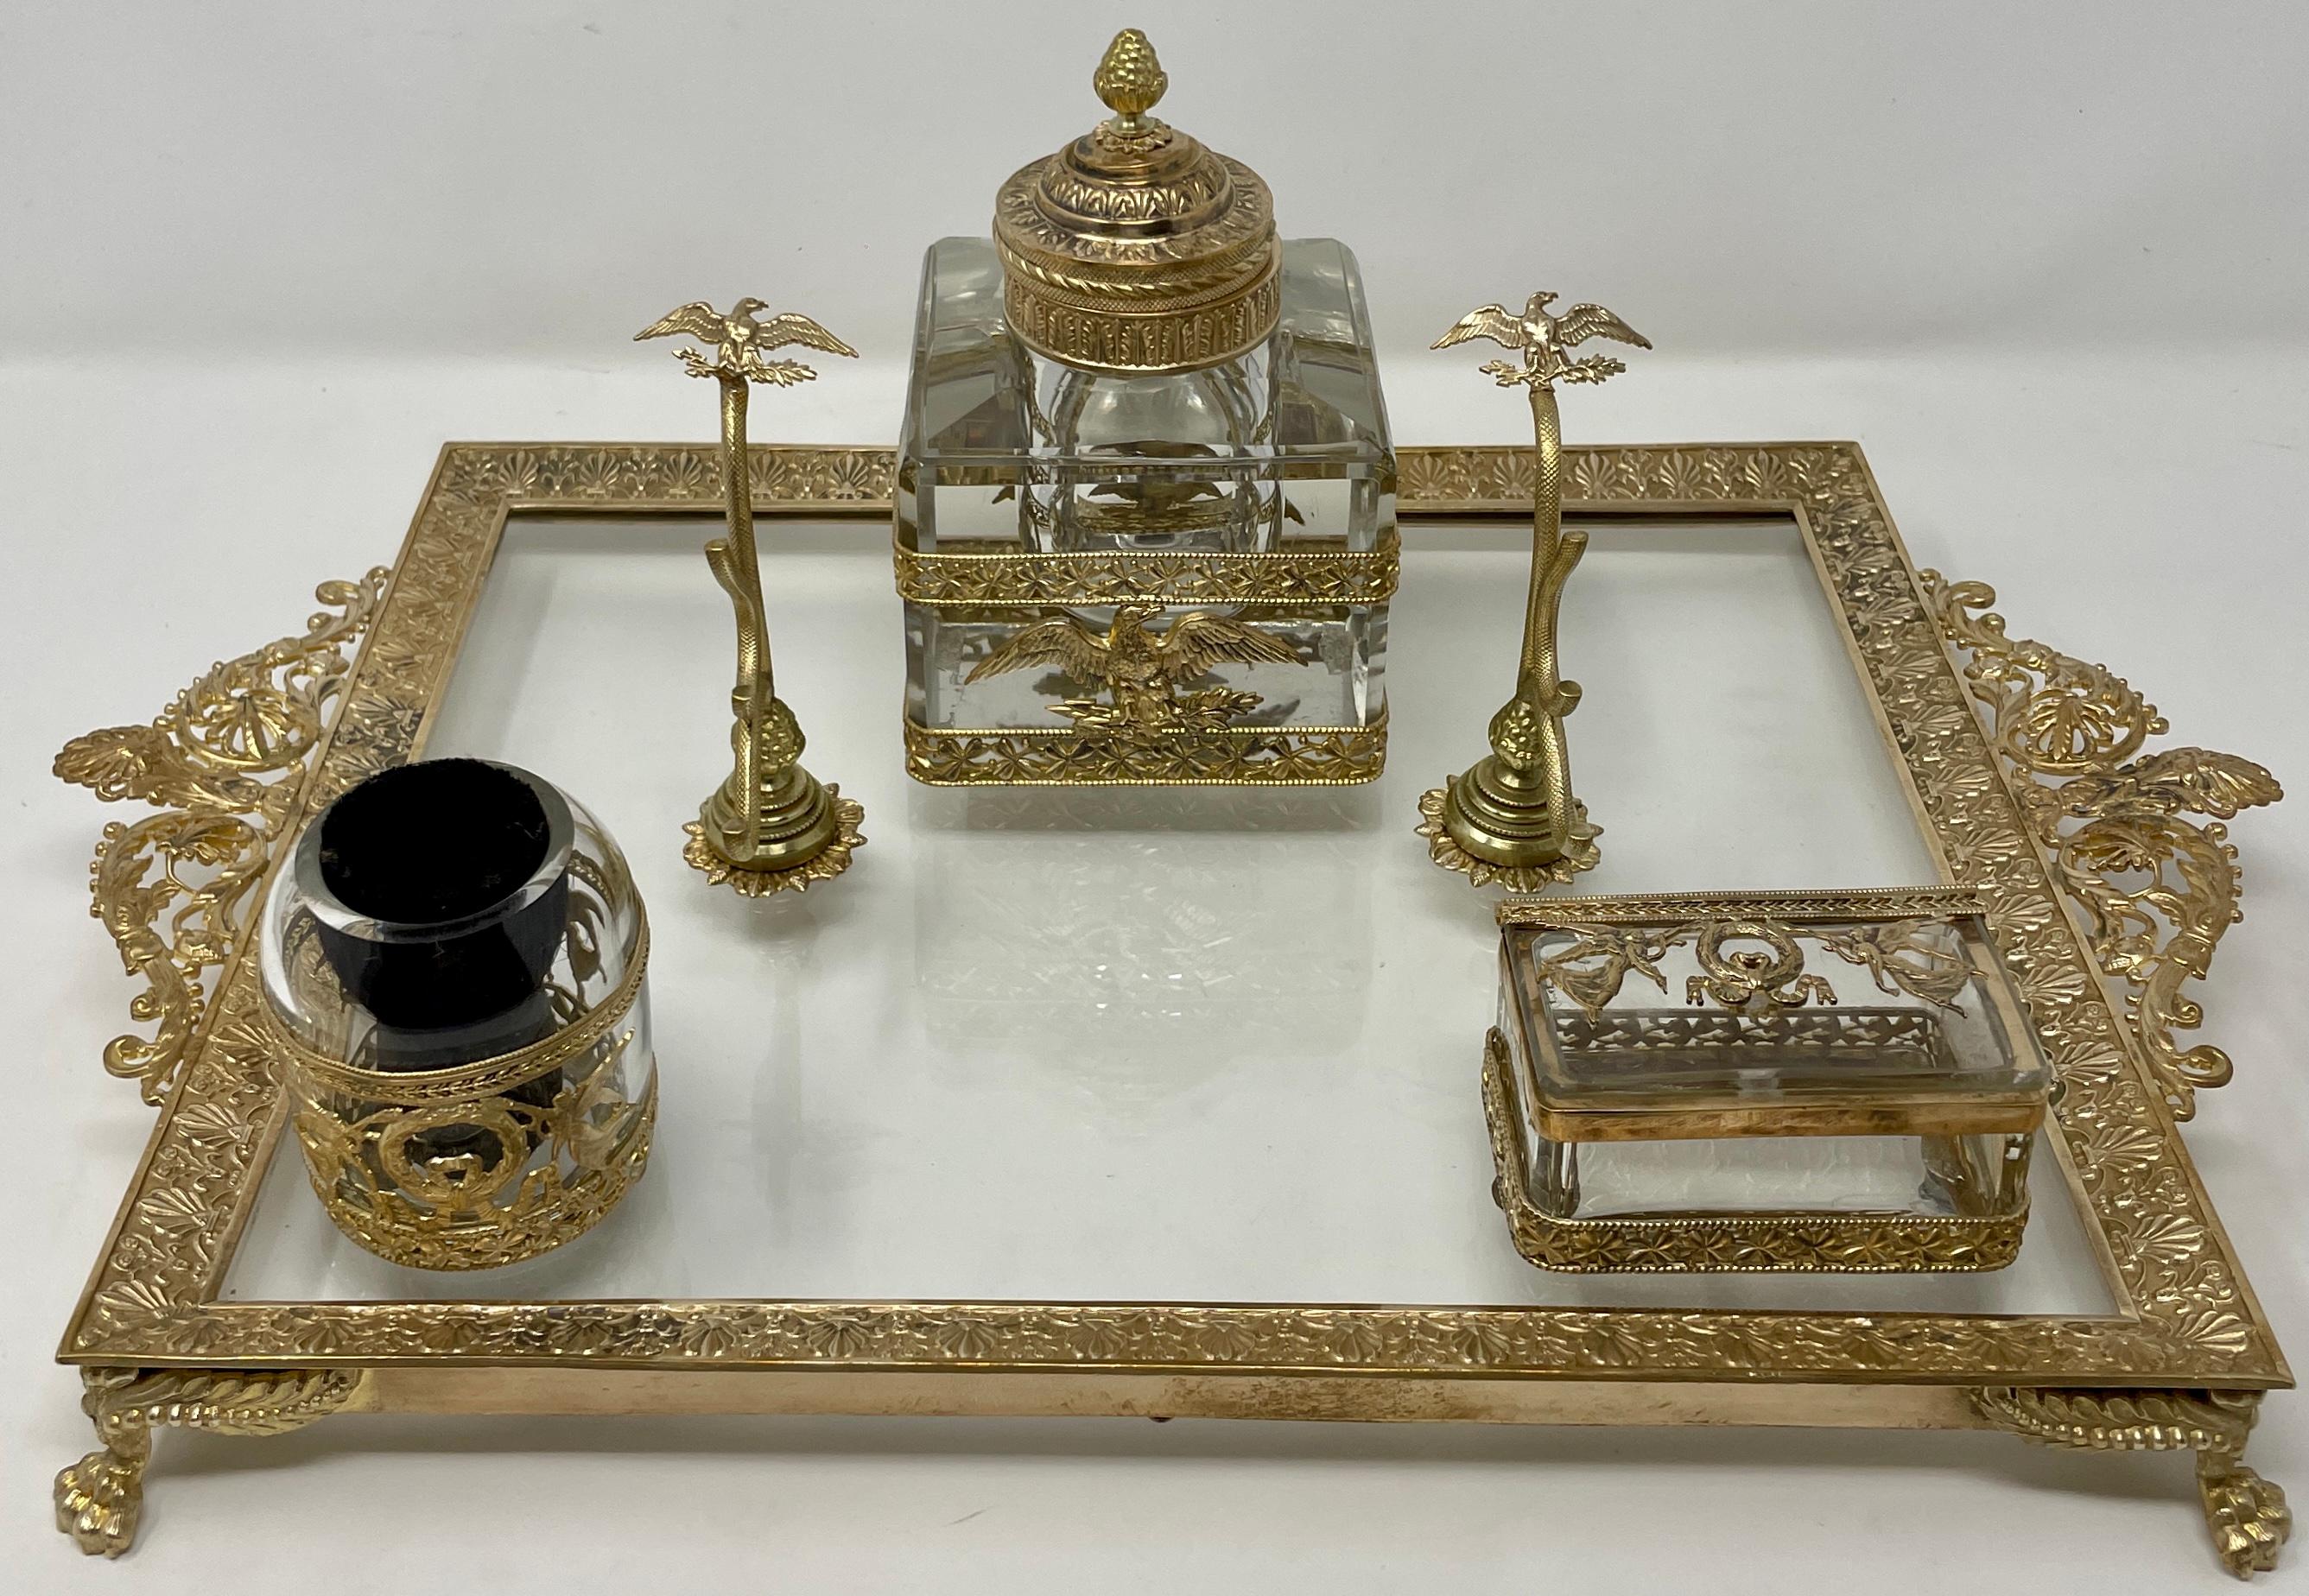 Antique French bronze D'Ore and cut crystal inkwell desk set on stand, Circa 1900.
Includes inkwell, pen holder, pen nib brush and drip box.